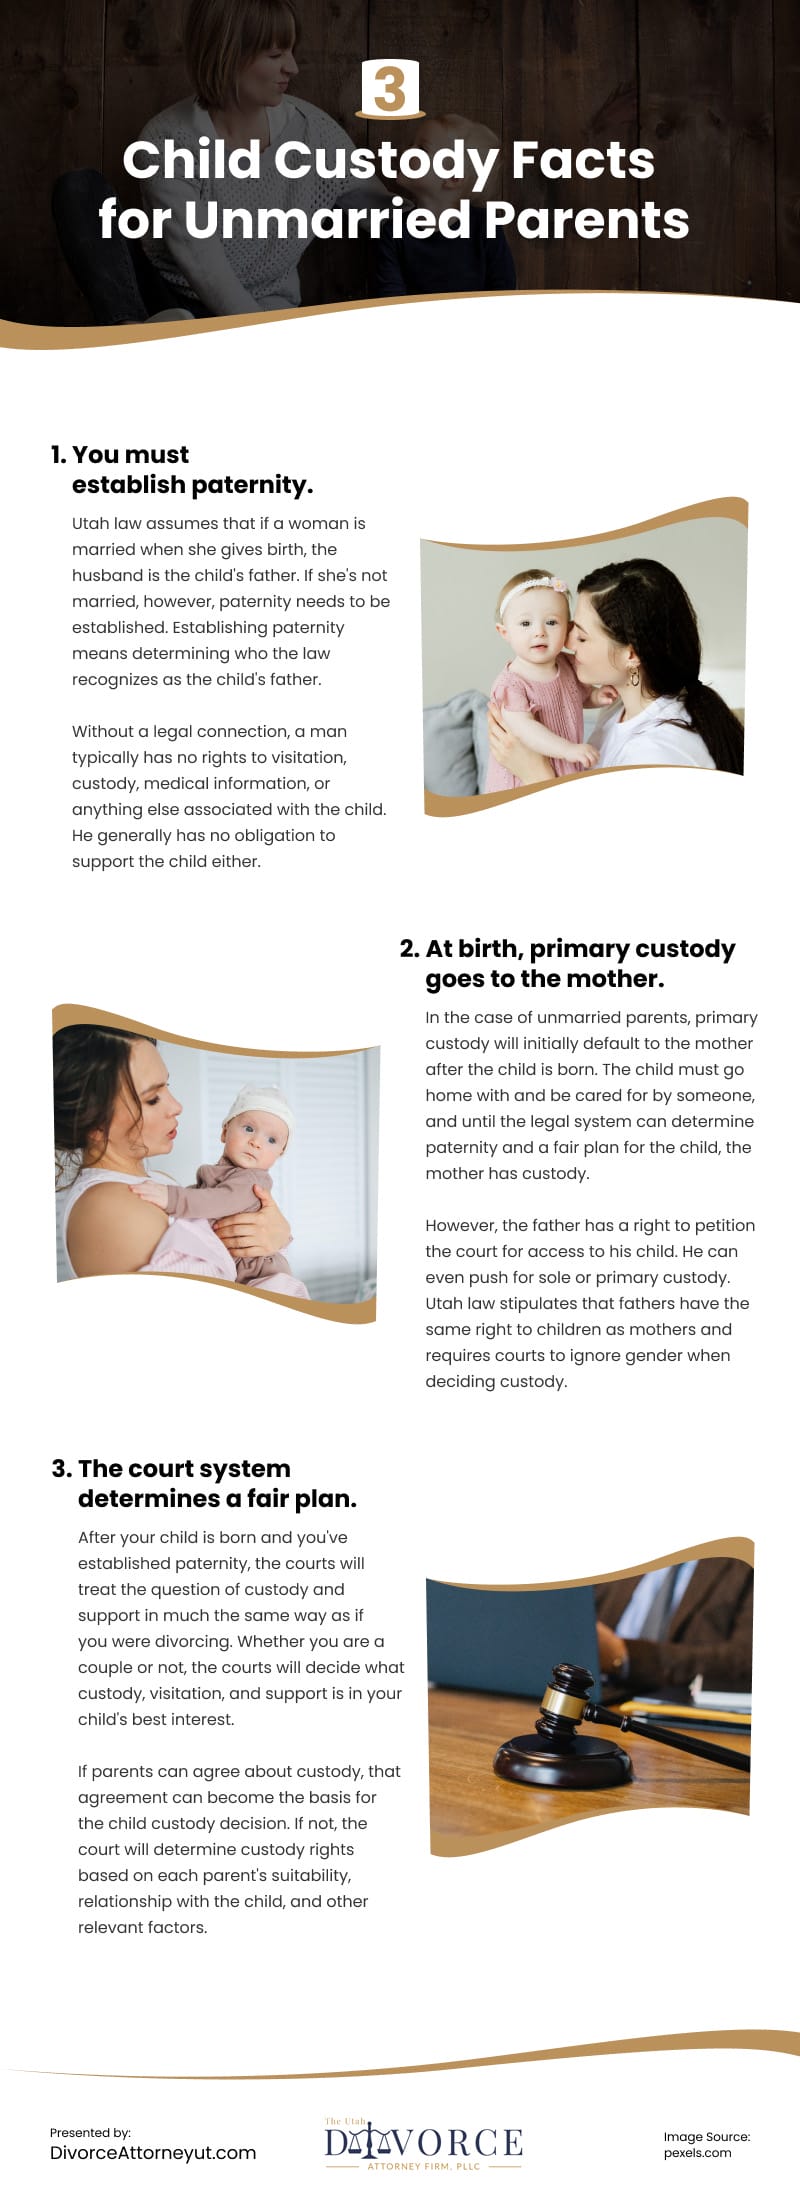 3 Child Custody Facts for Unmarried Parents